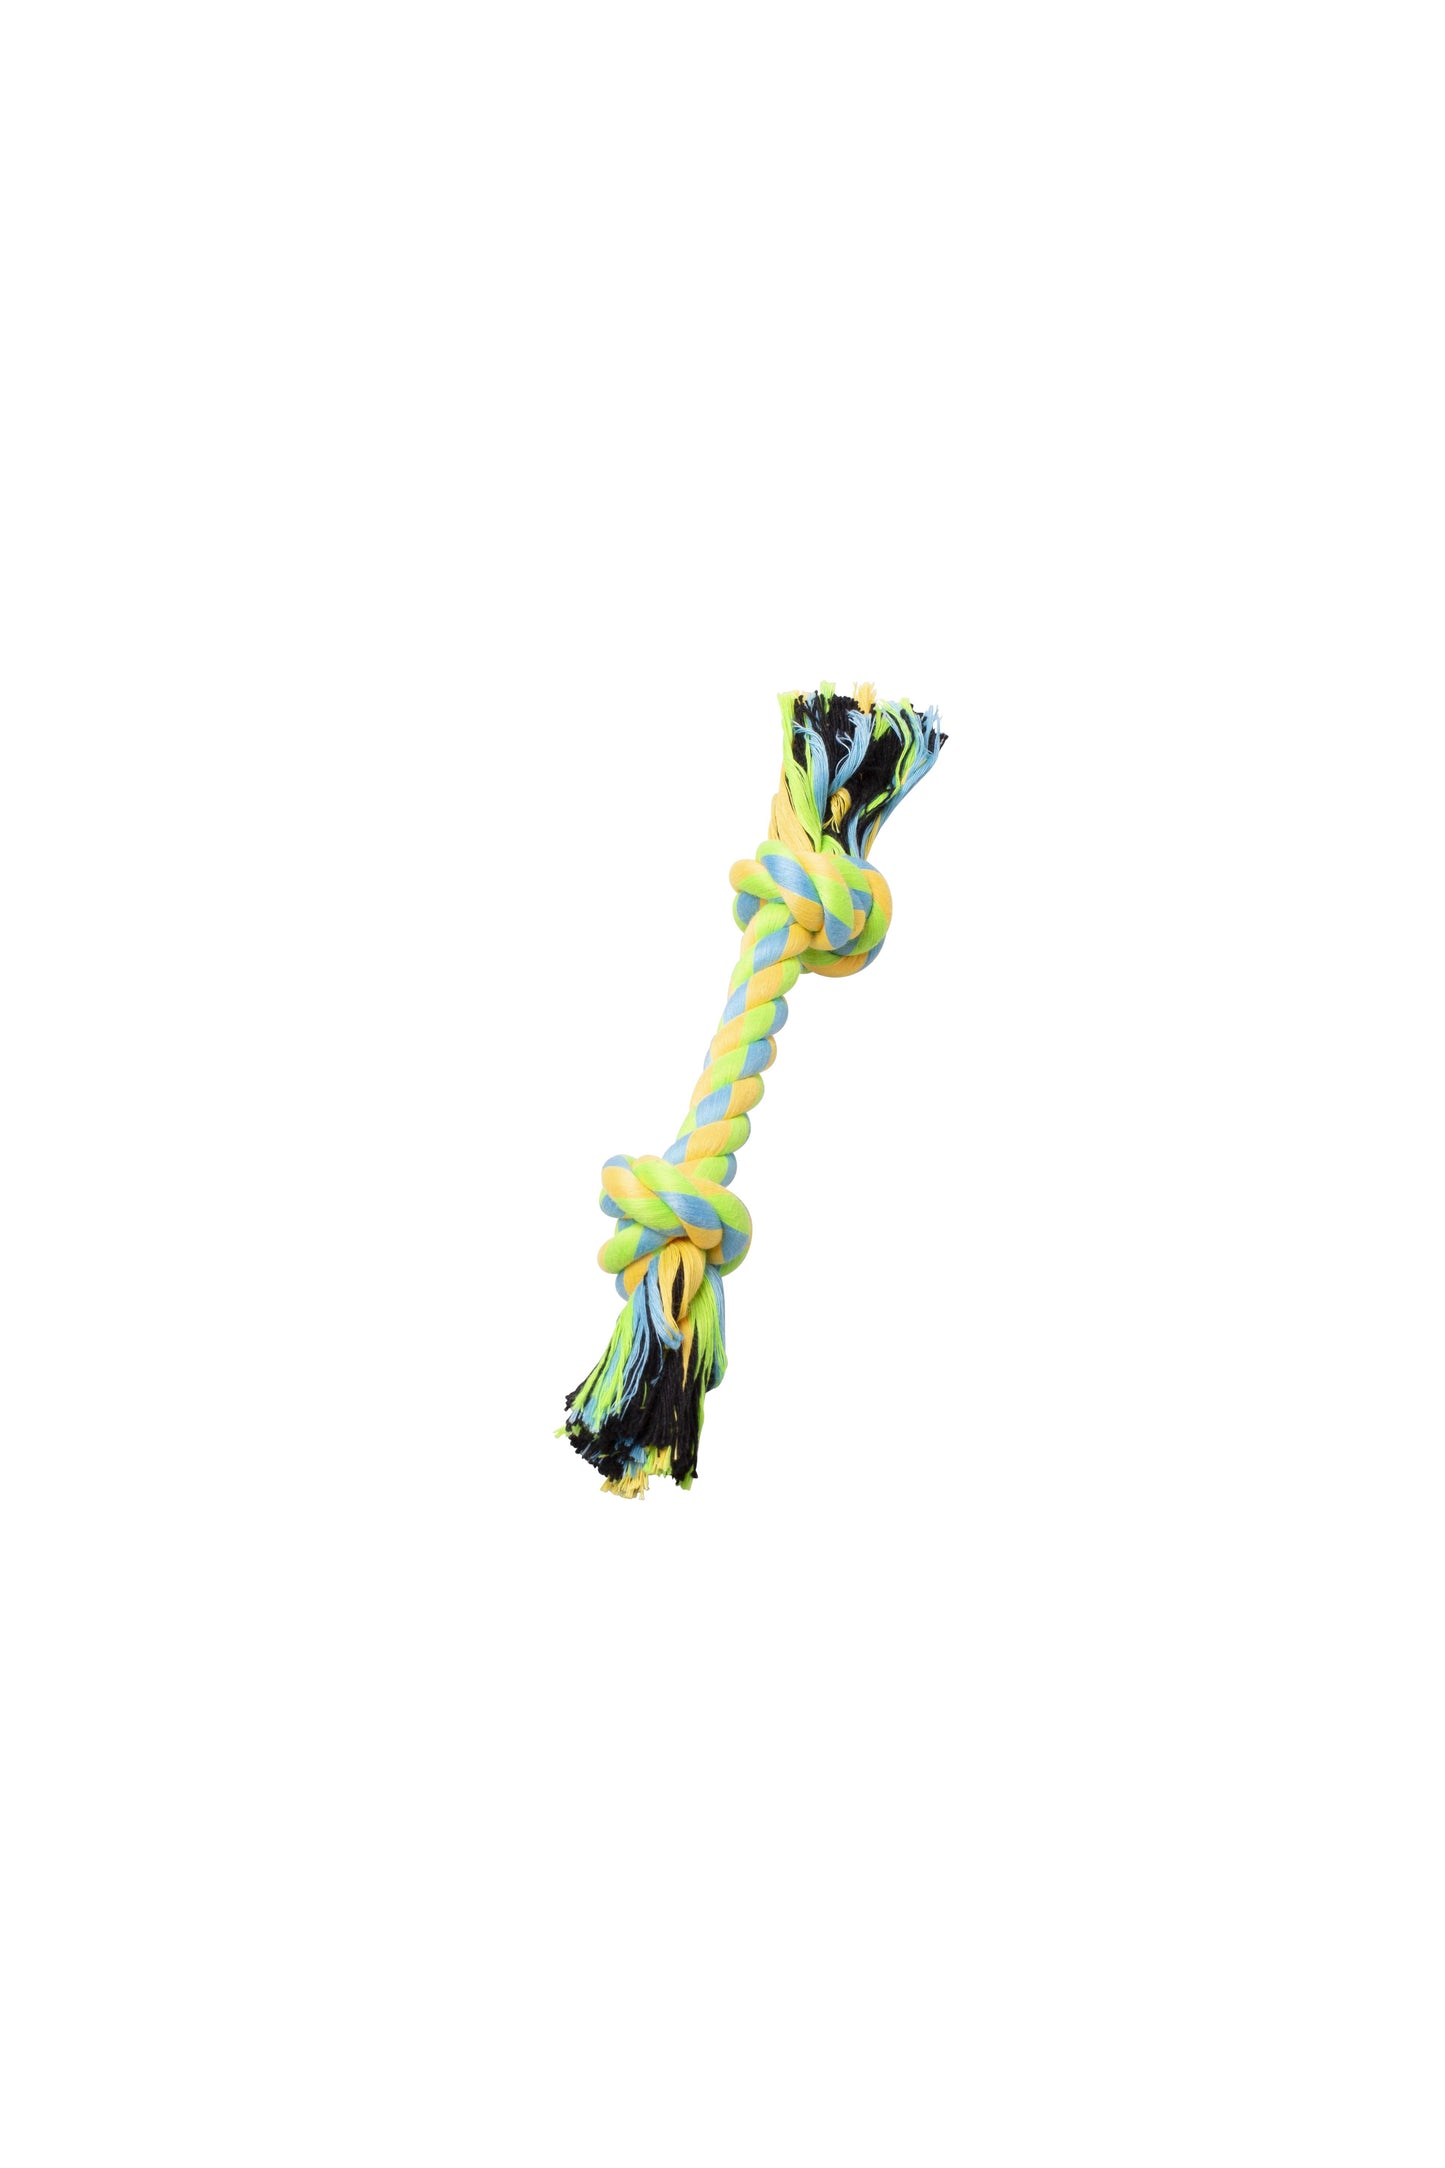 Bud'z Rope with 2 Knots Dog Toy, Green/Yellow, 22-cm (Size: 22-cm)